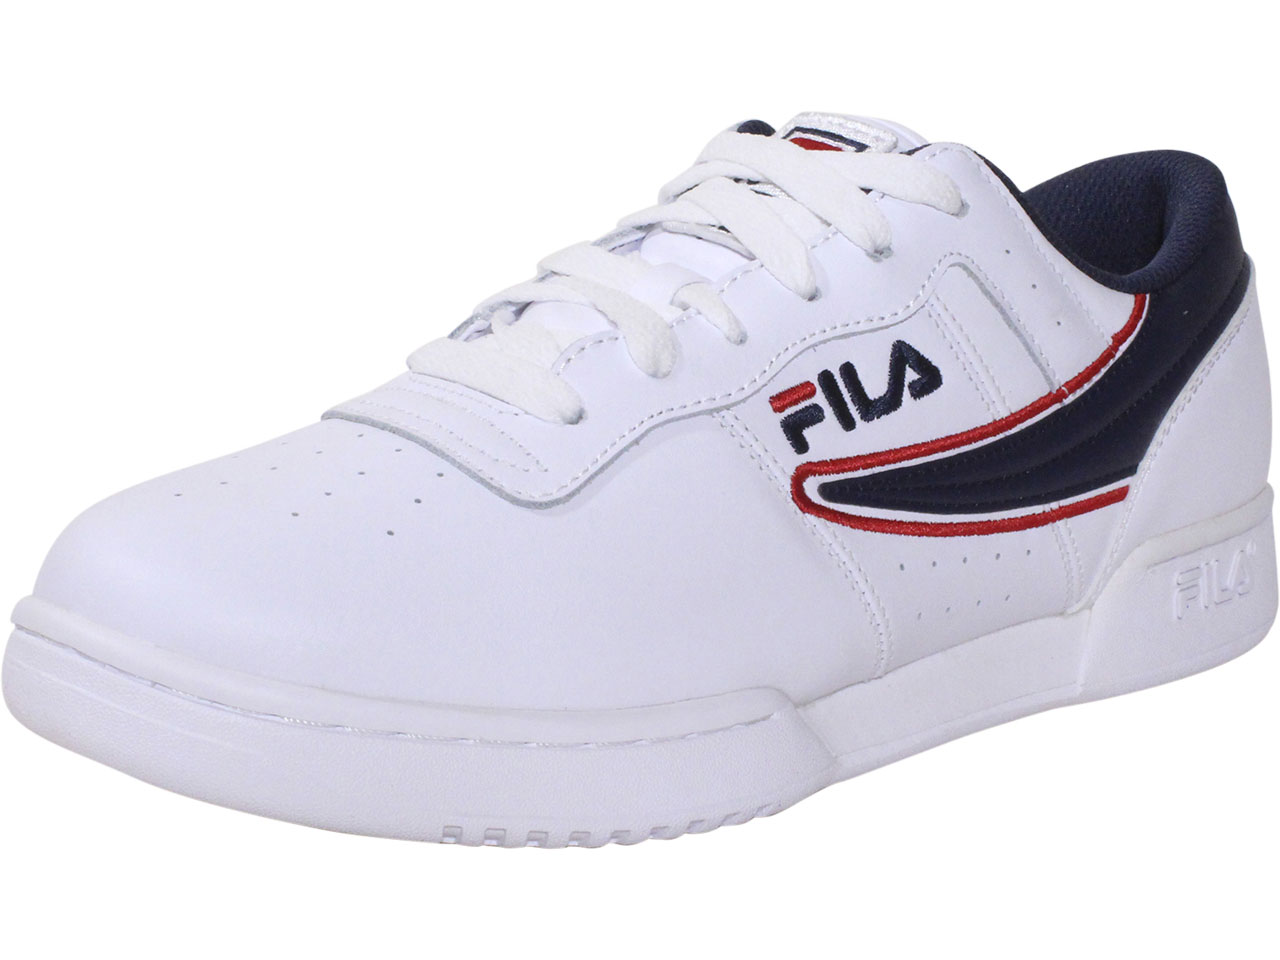 Fila Original Fitness Offset Sneakers White/Navy/Red Men's Low Top ...